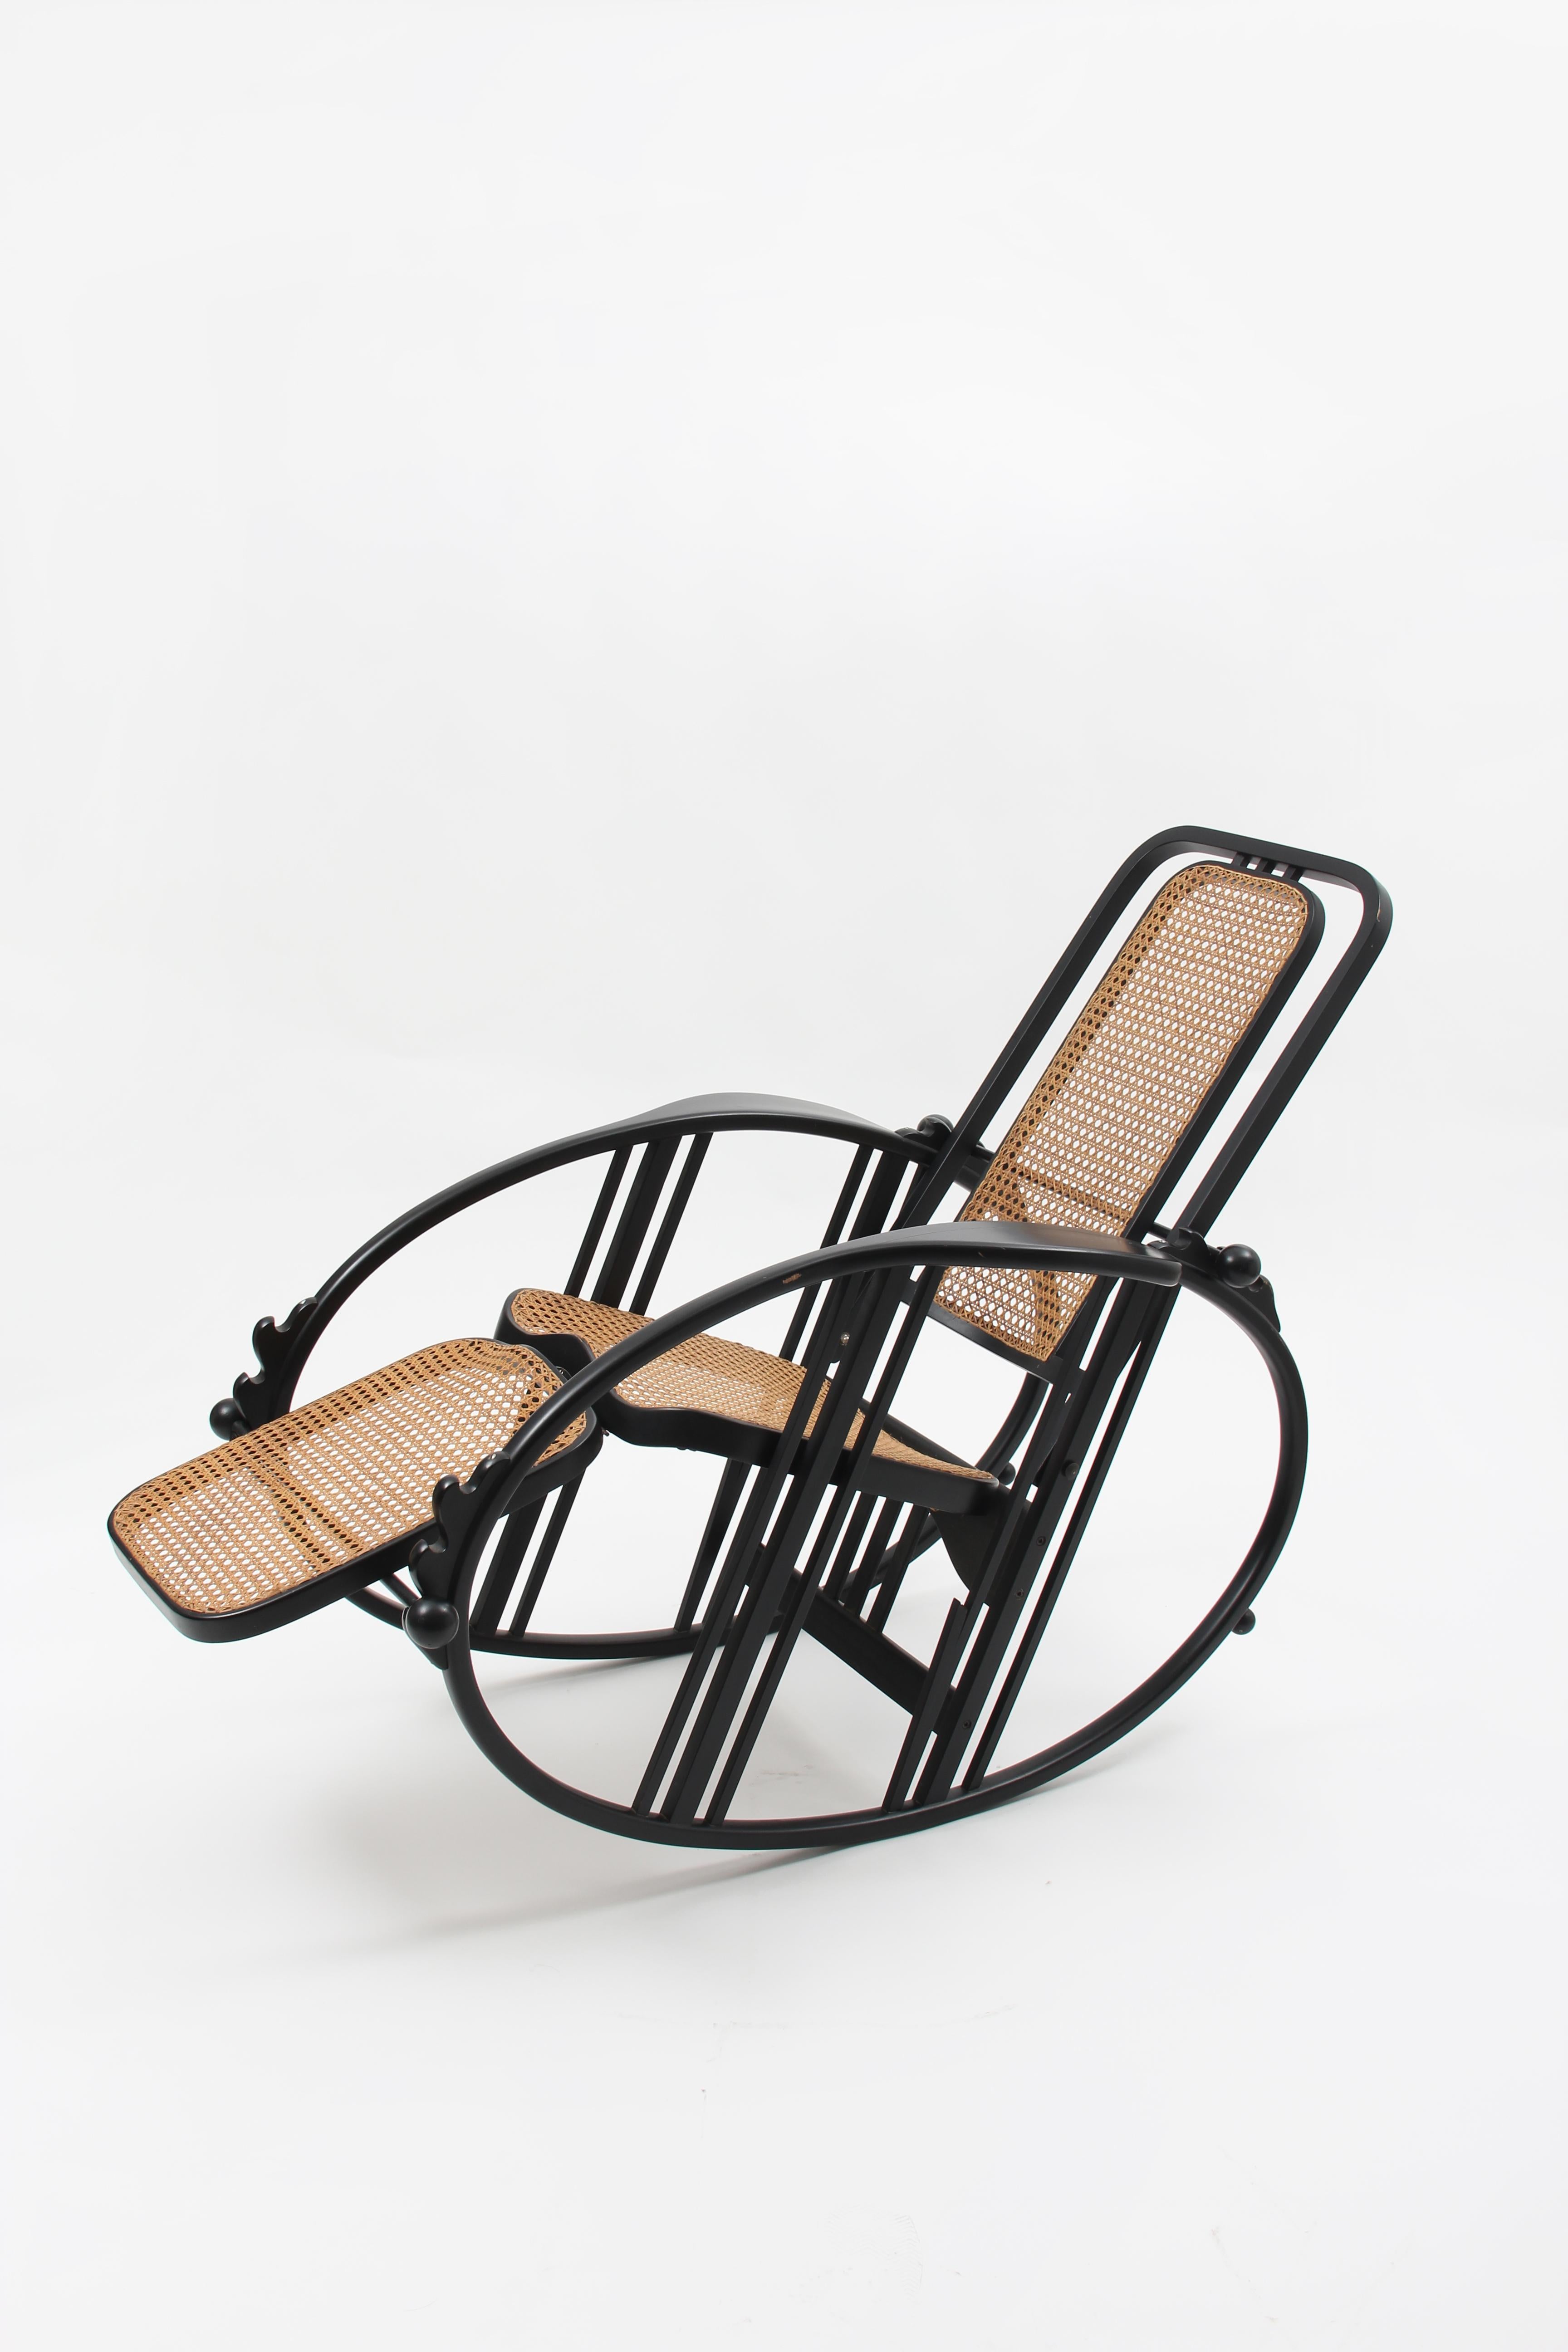 Egg Rocking Chair attributed to Josef Hoffmann for Società Anonima Antonio Volpe For Sale 6